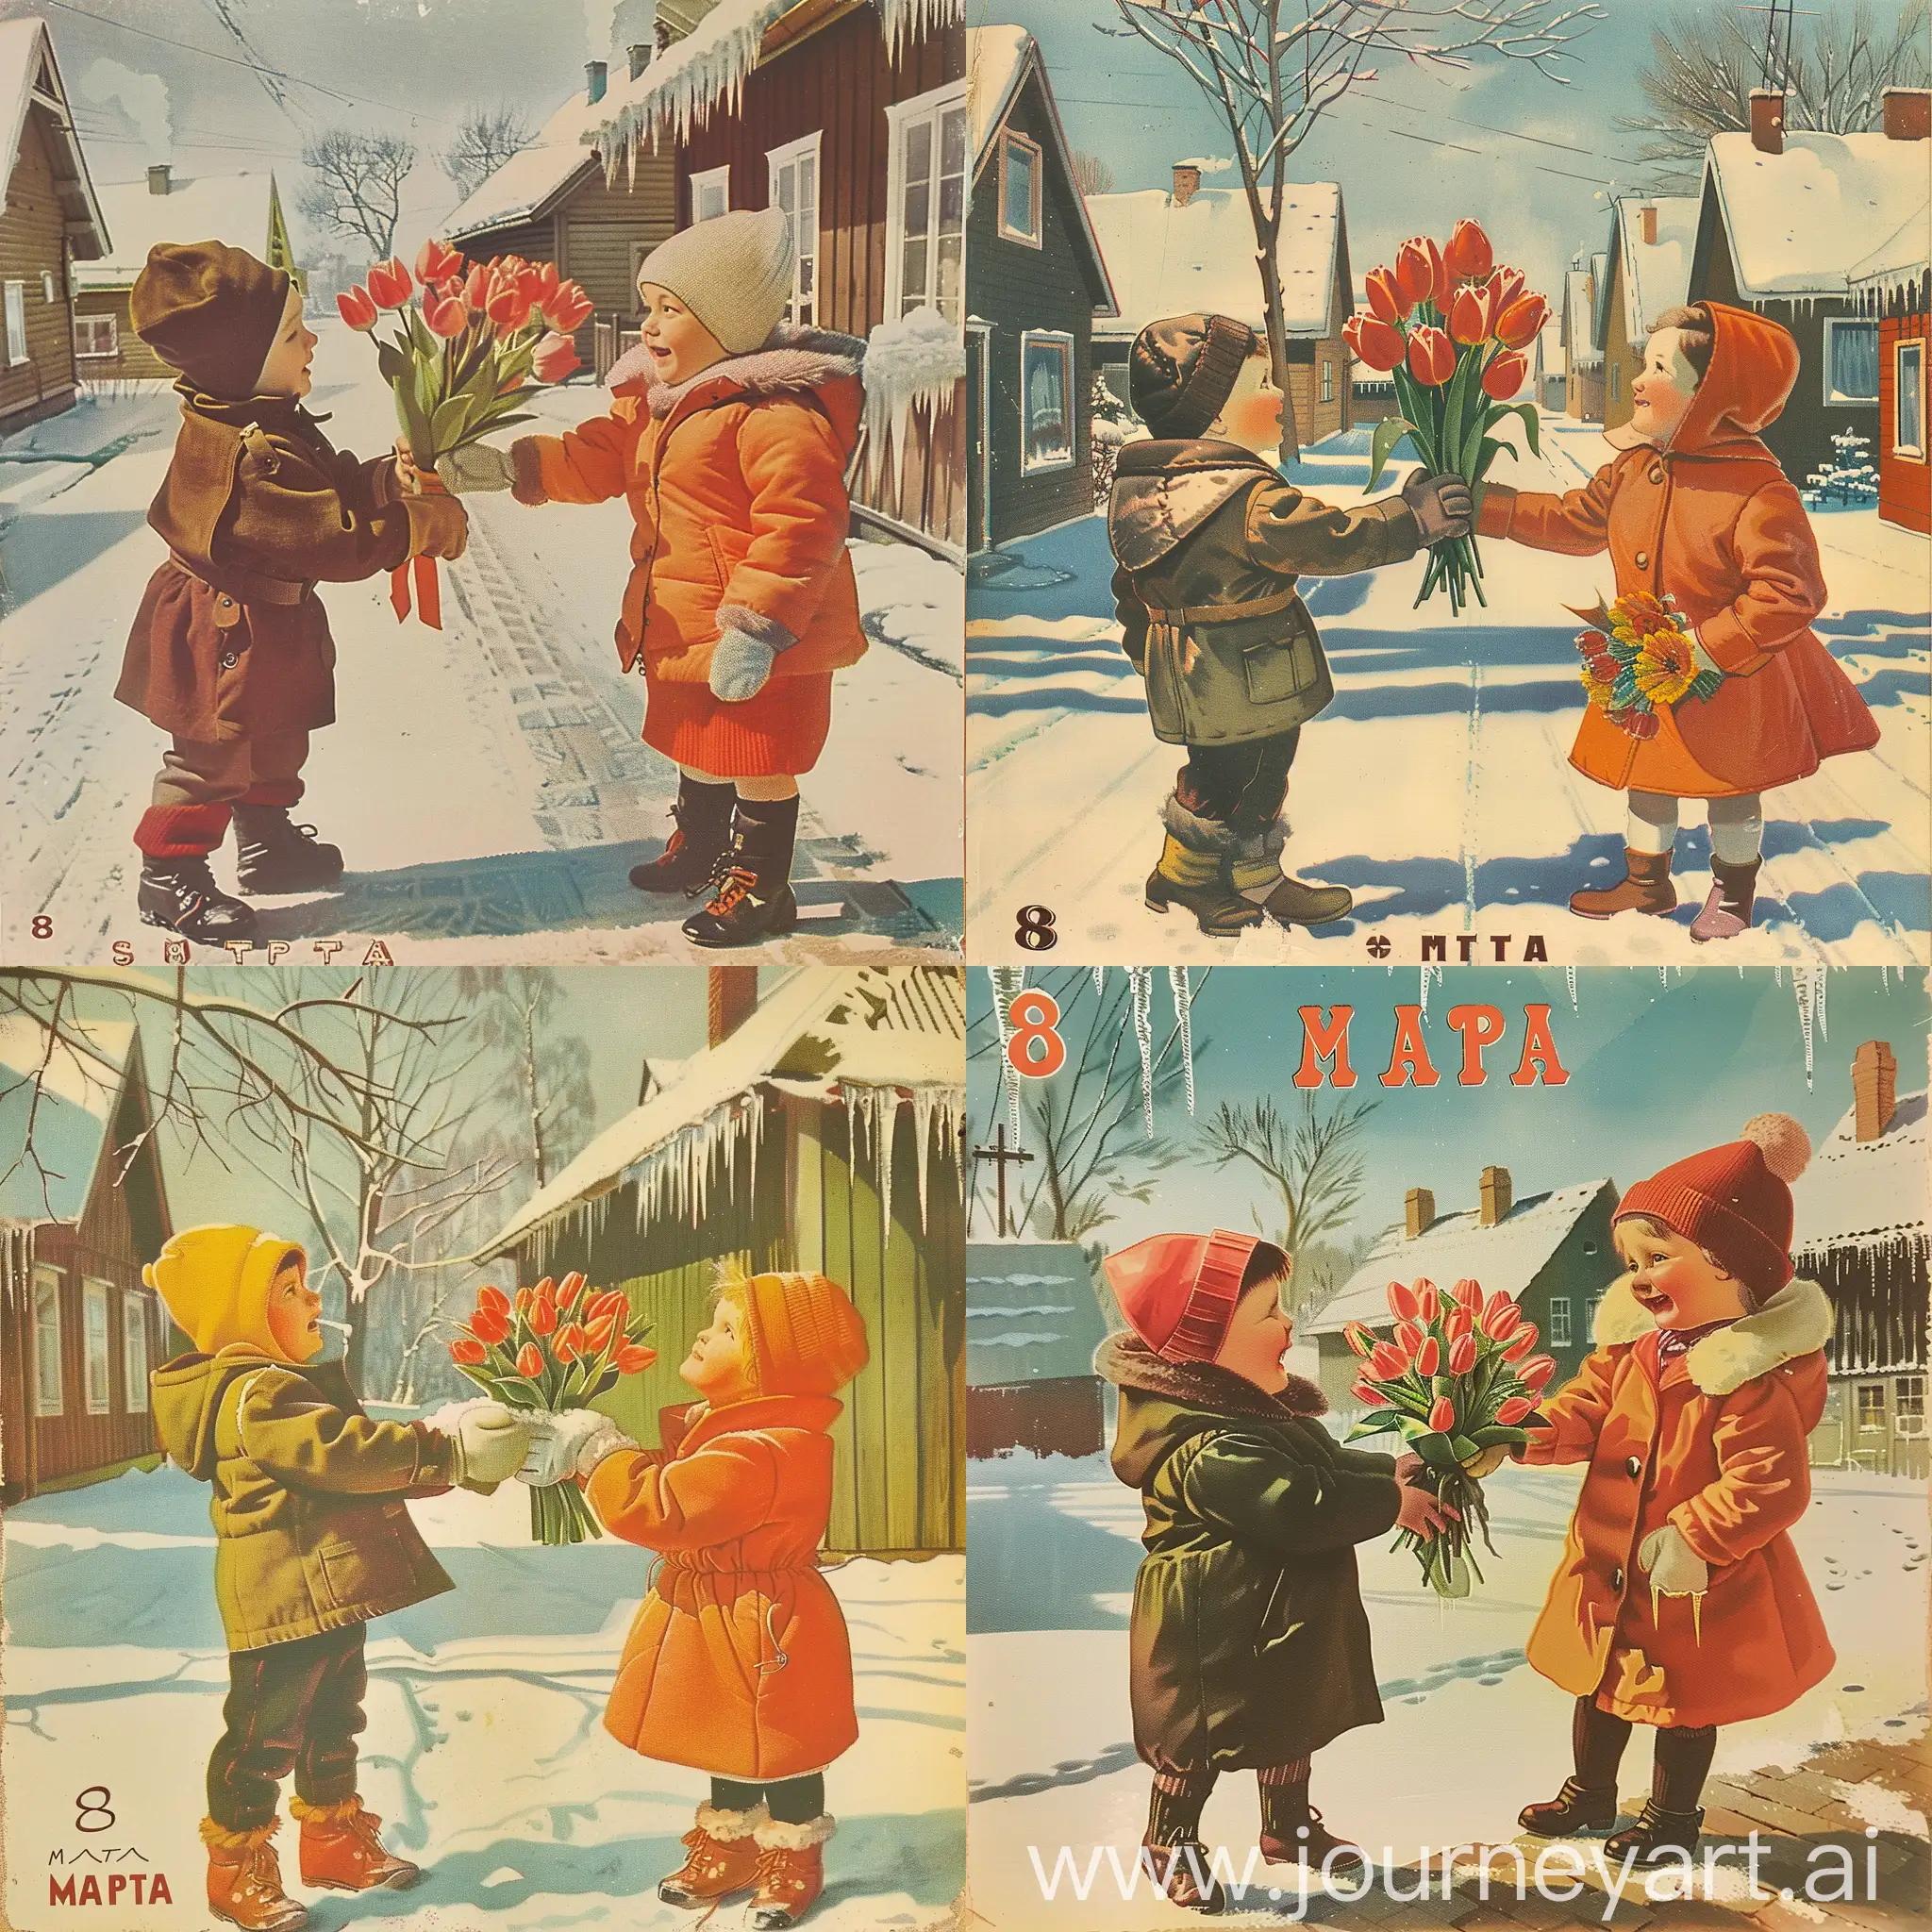 Charming-Winter-Scene-Sweet-Exchange-of-Tulips-on-8th-March-Postcard